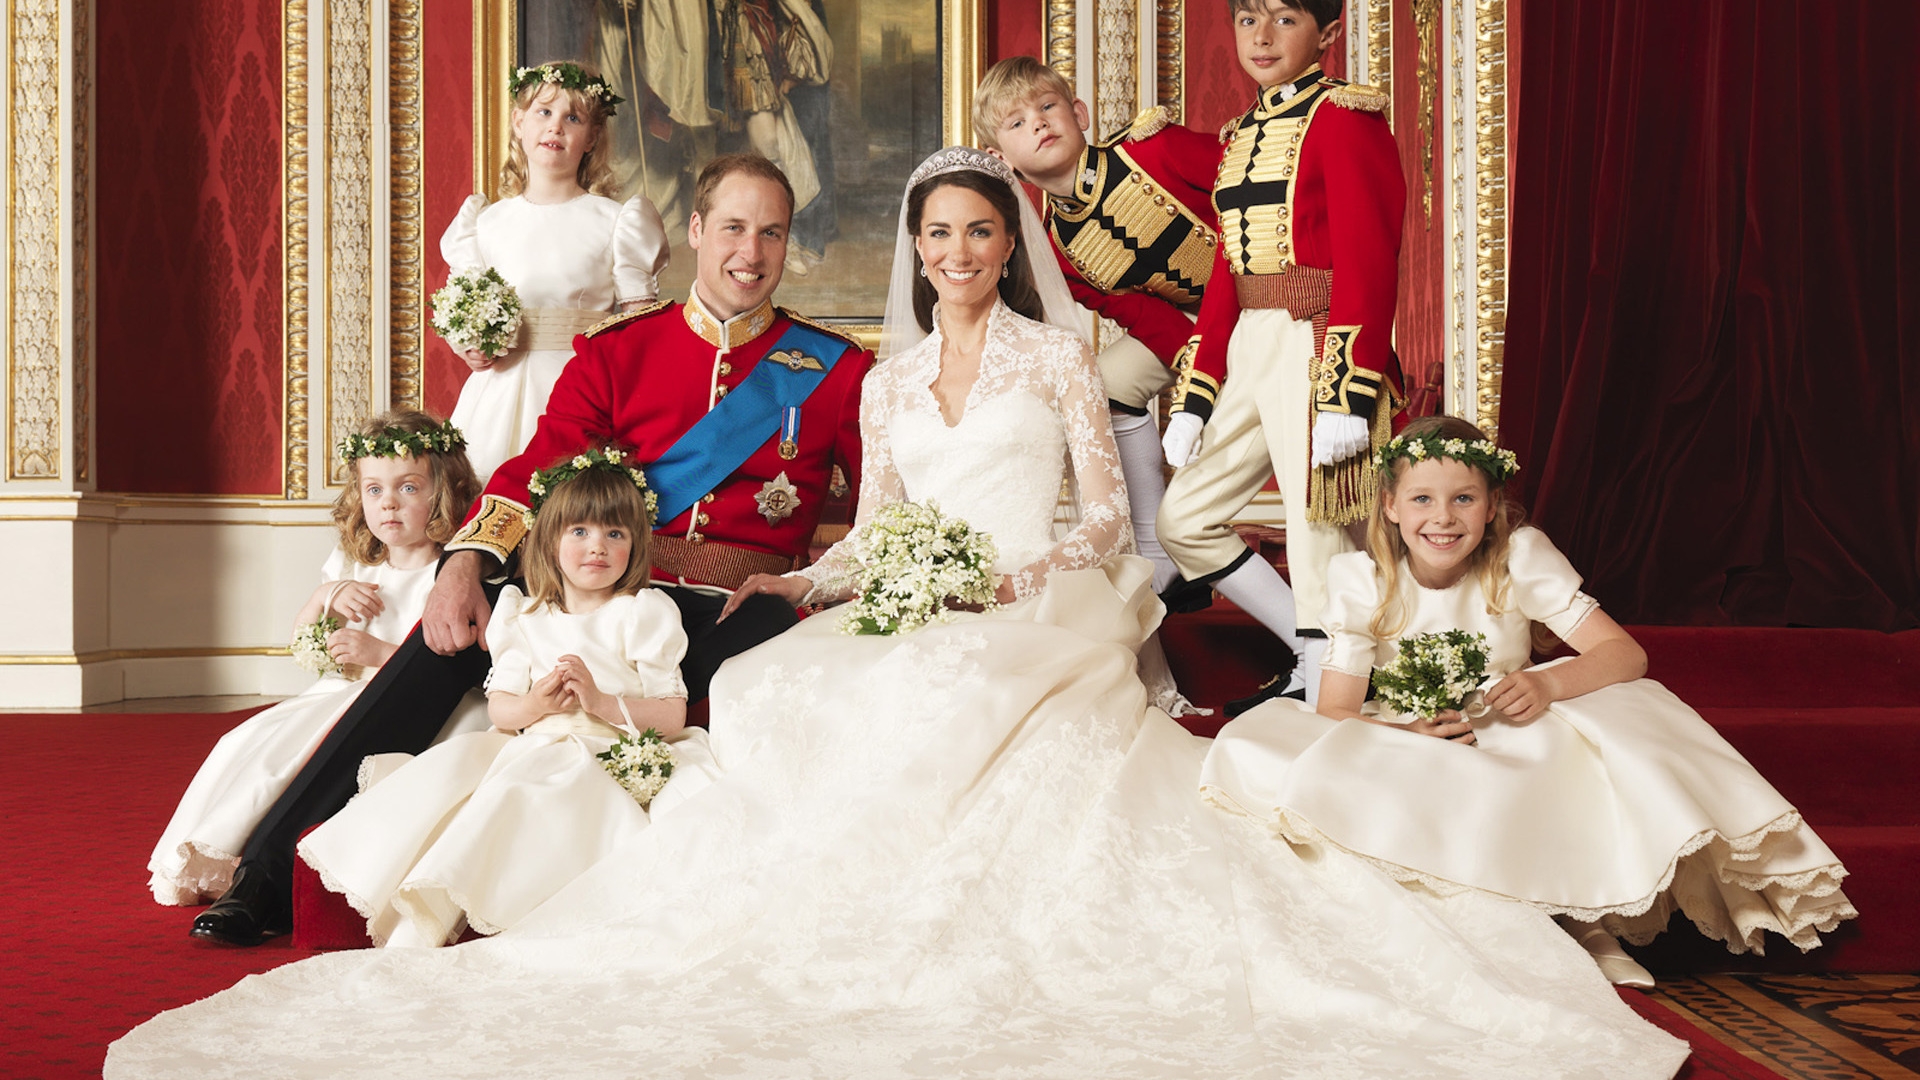 William and Kate Royal Wedding for 1920 x 1080 HDTV 1080p resolution